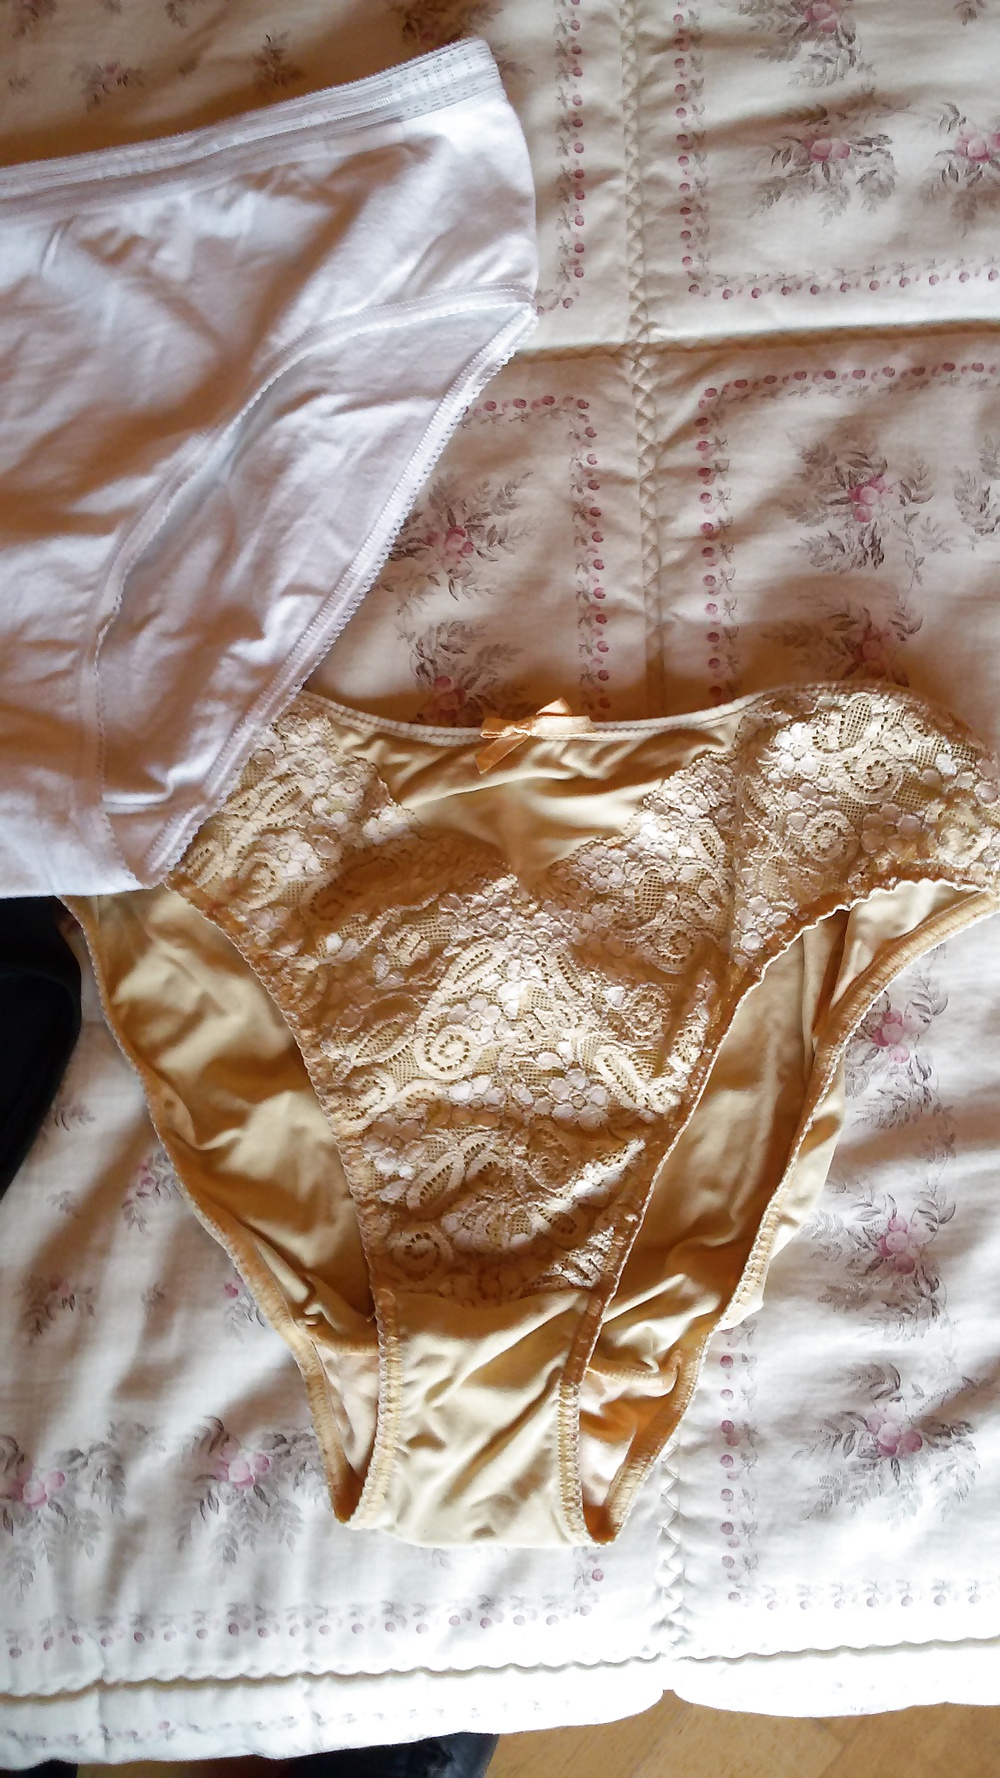 Nuove mutande di NON mia suocera ( new NOT mother in law panties) #39038021